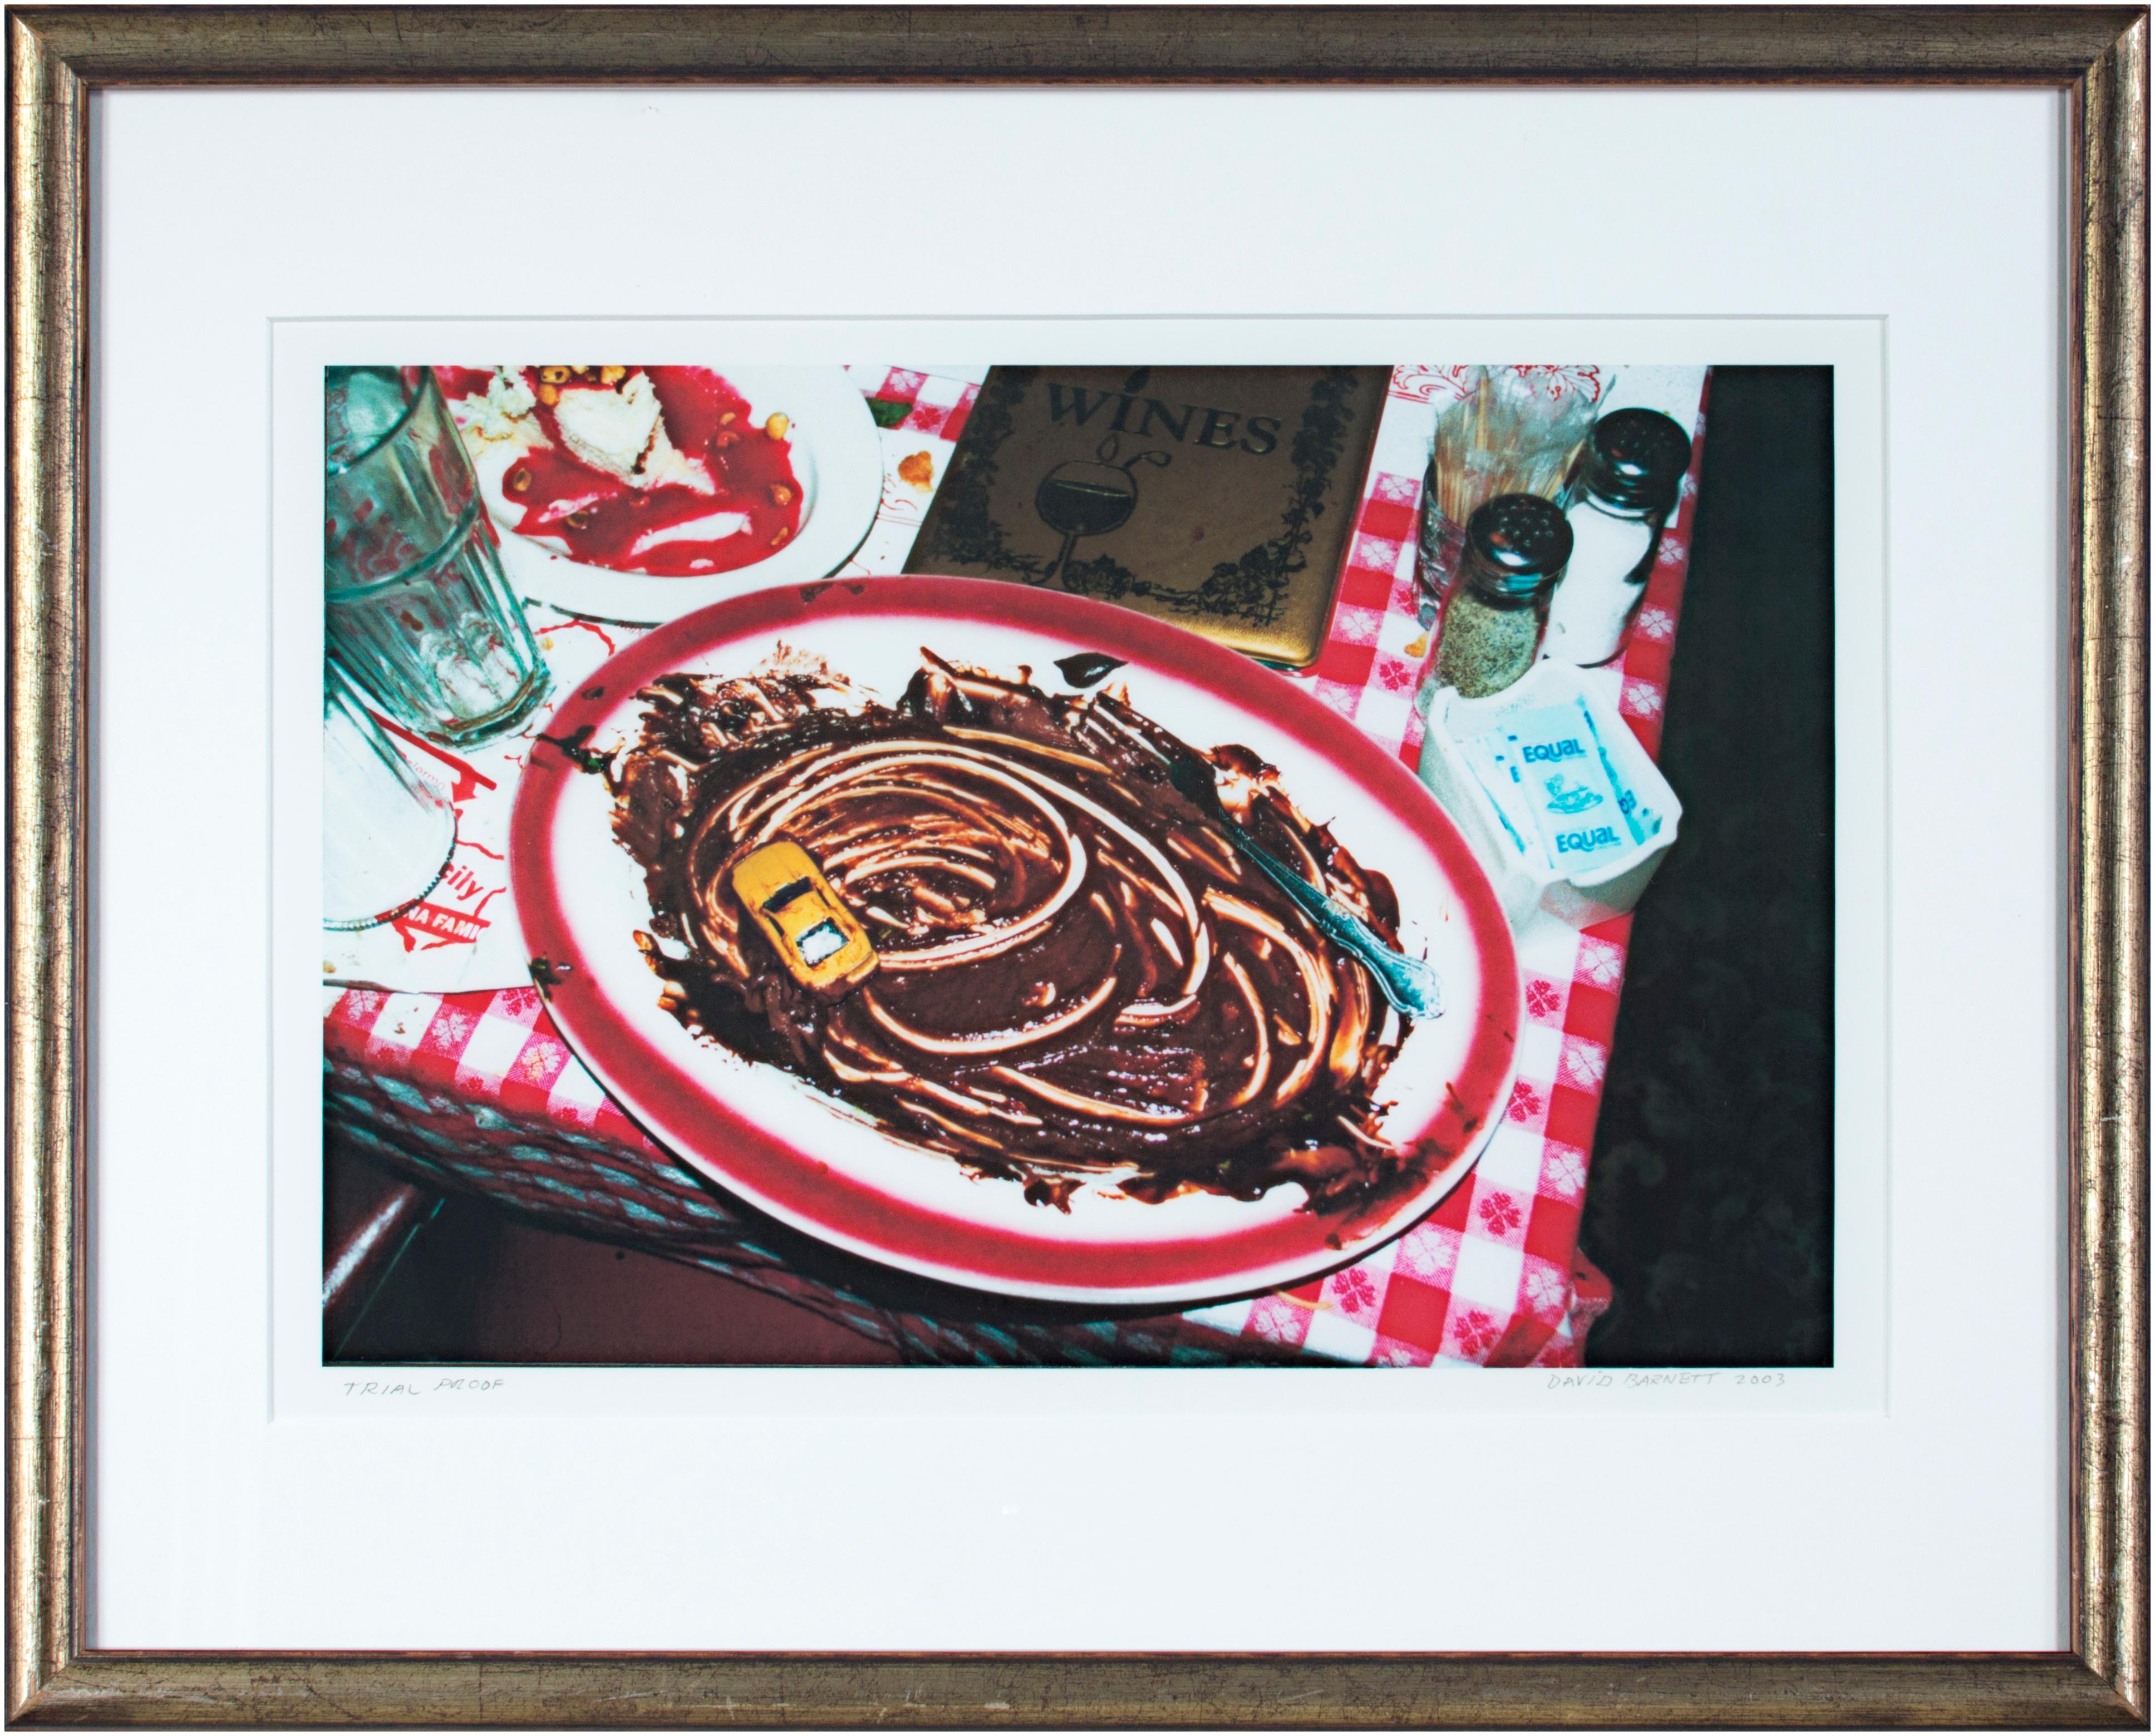 'Buca di Beppo - Chocolate Demolition Derby' signed trial proof photograph